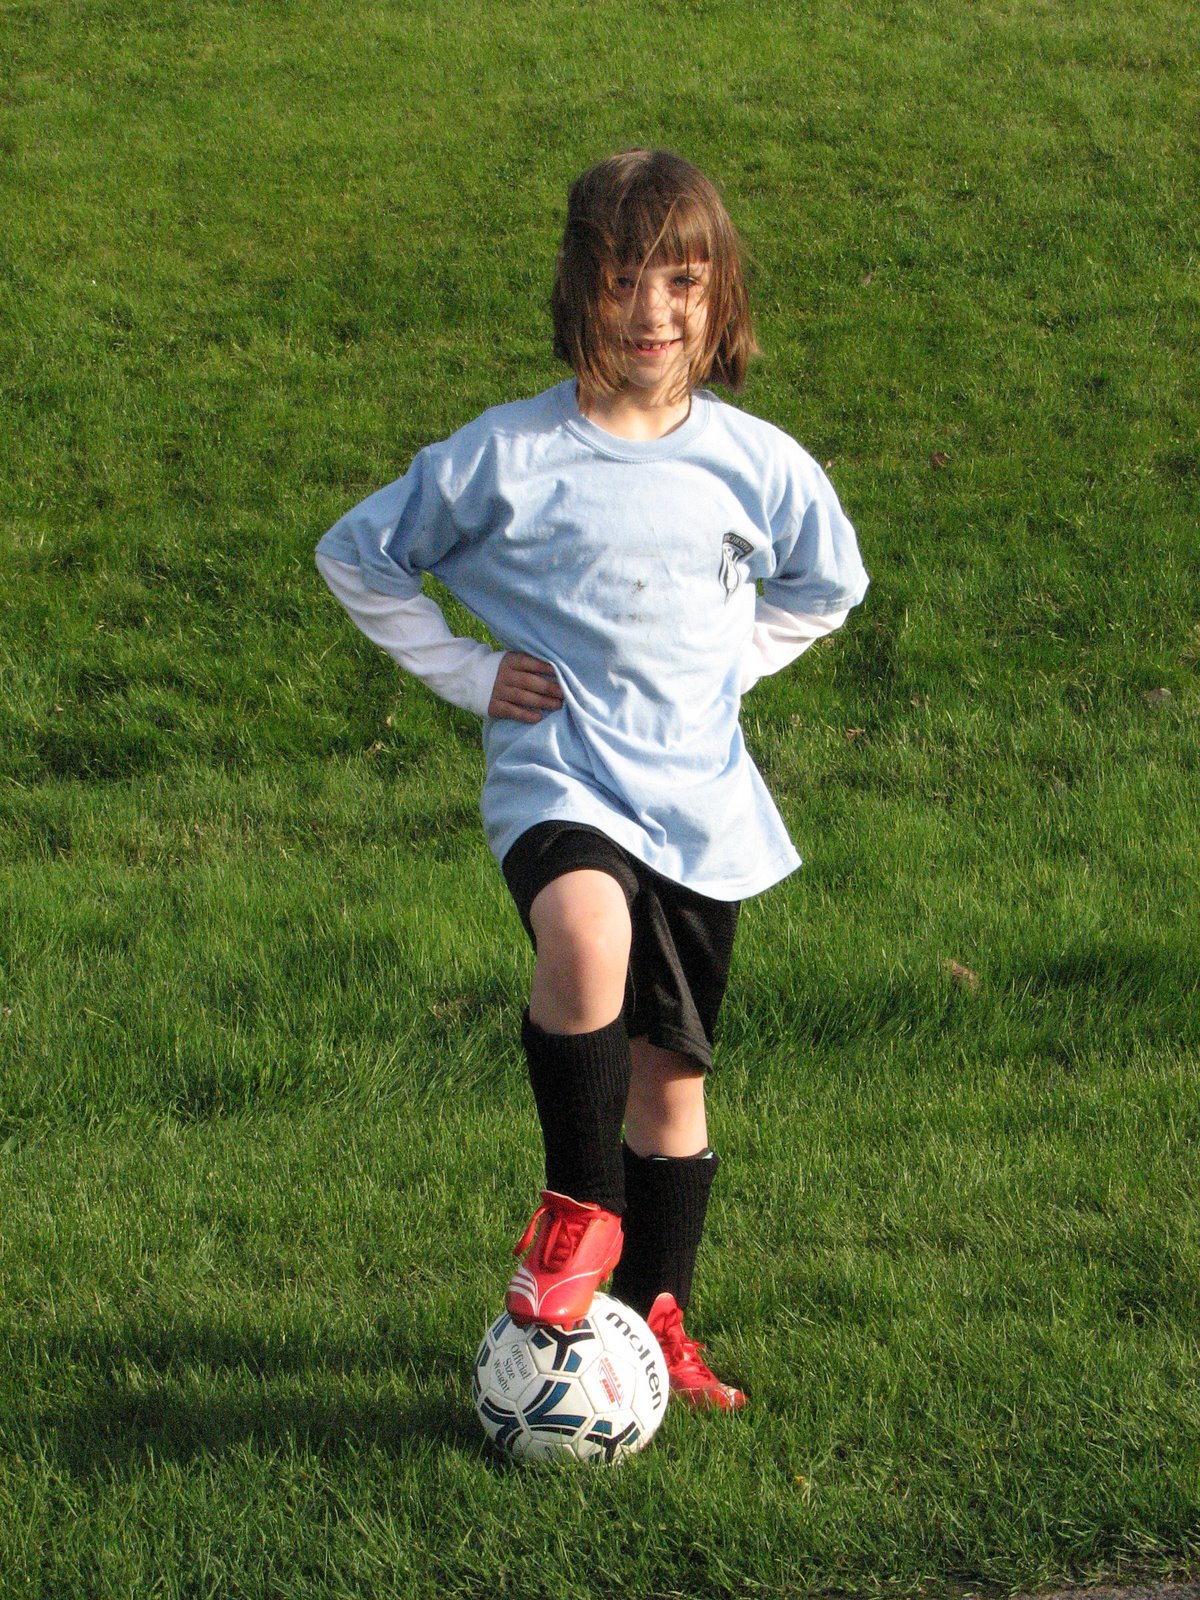 [Madison+soccer+picture+2.JPG]